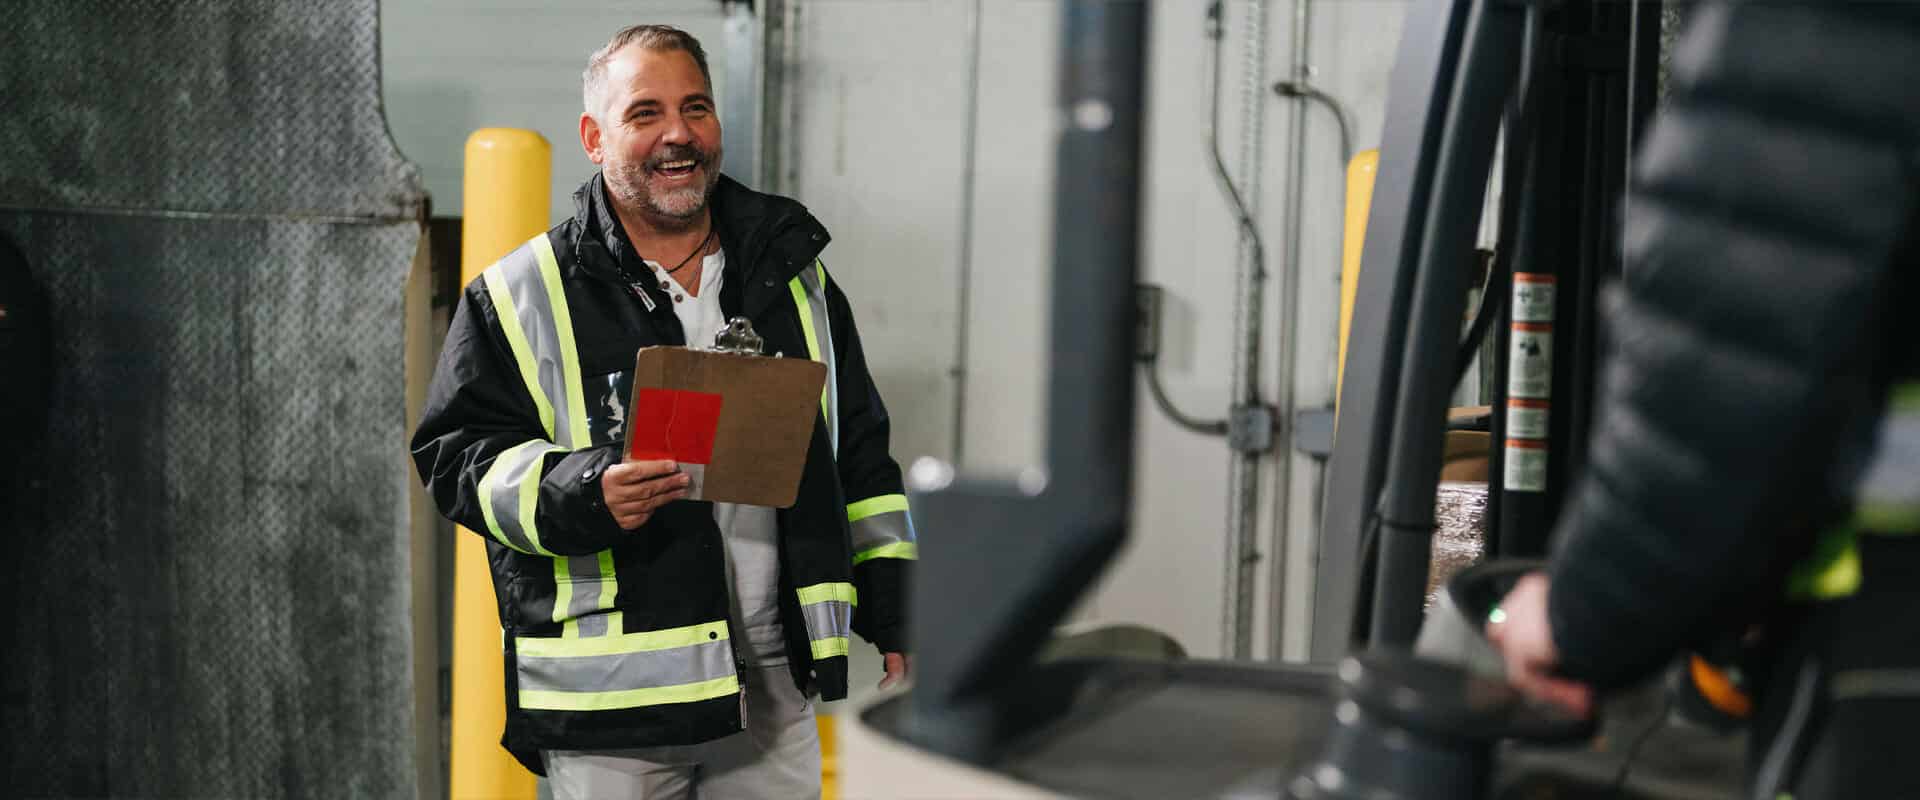 A warehouse worker smiling as he converses with a man operating a fork lift